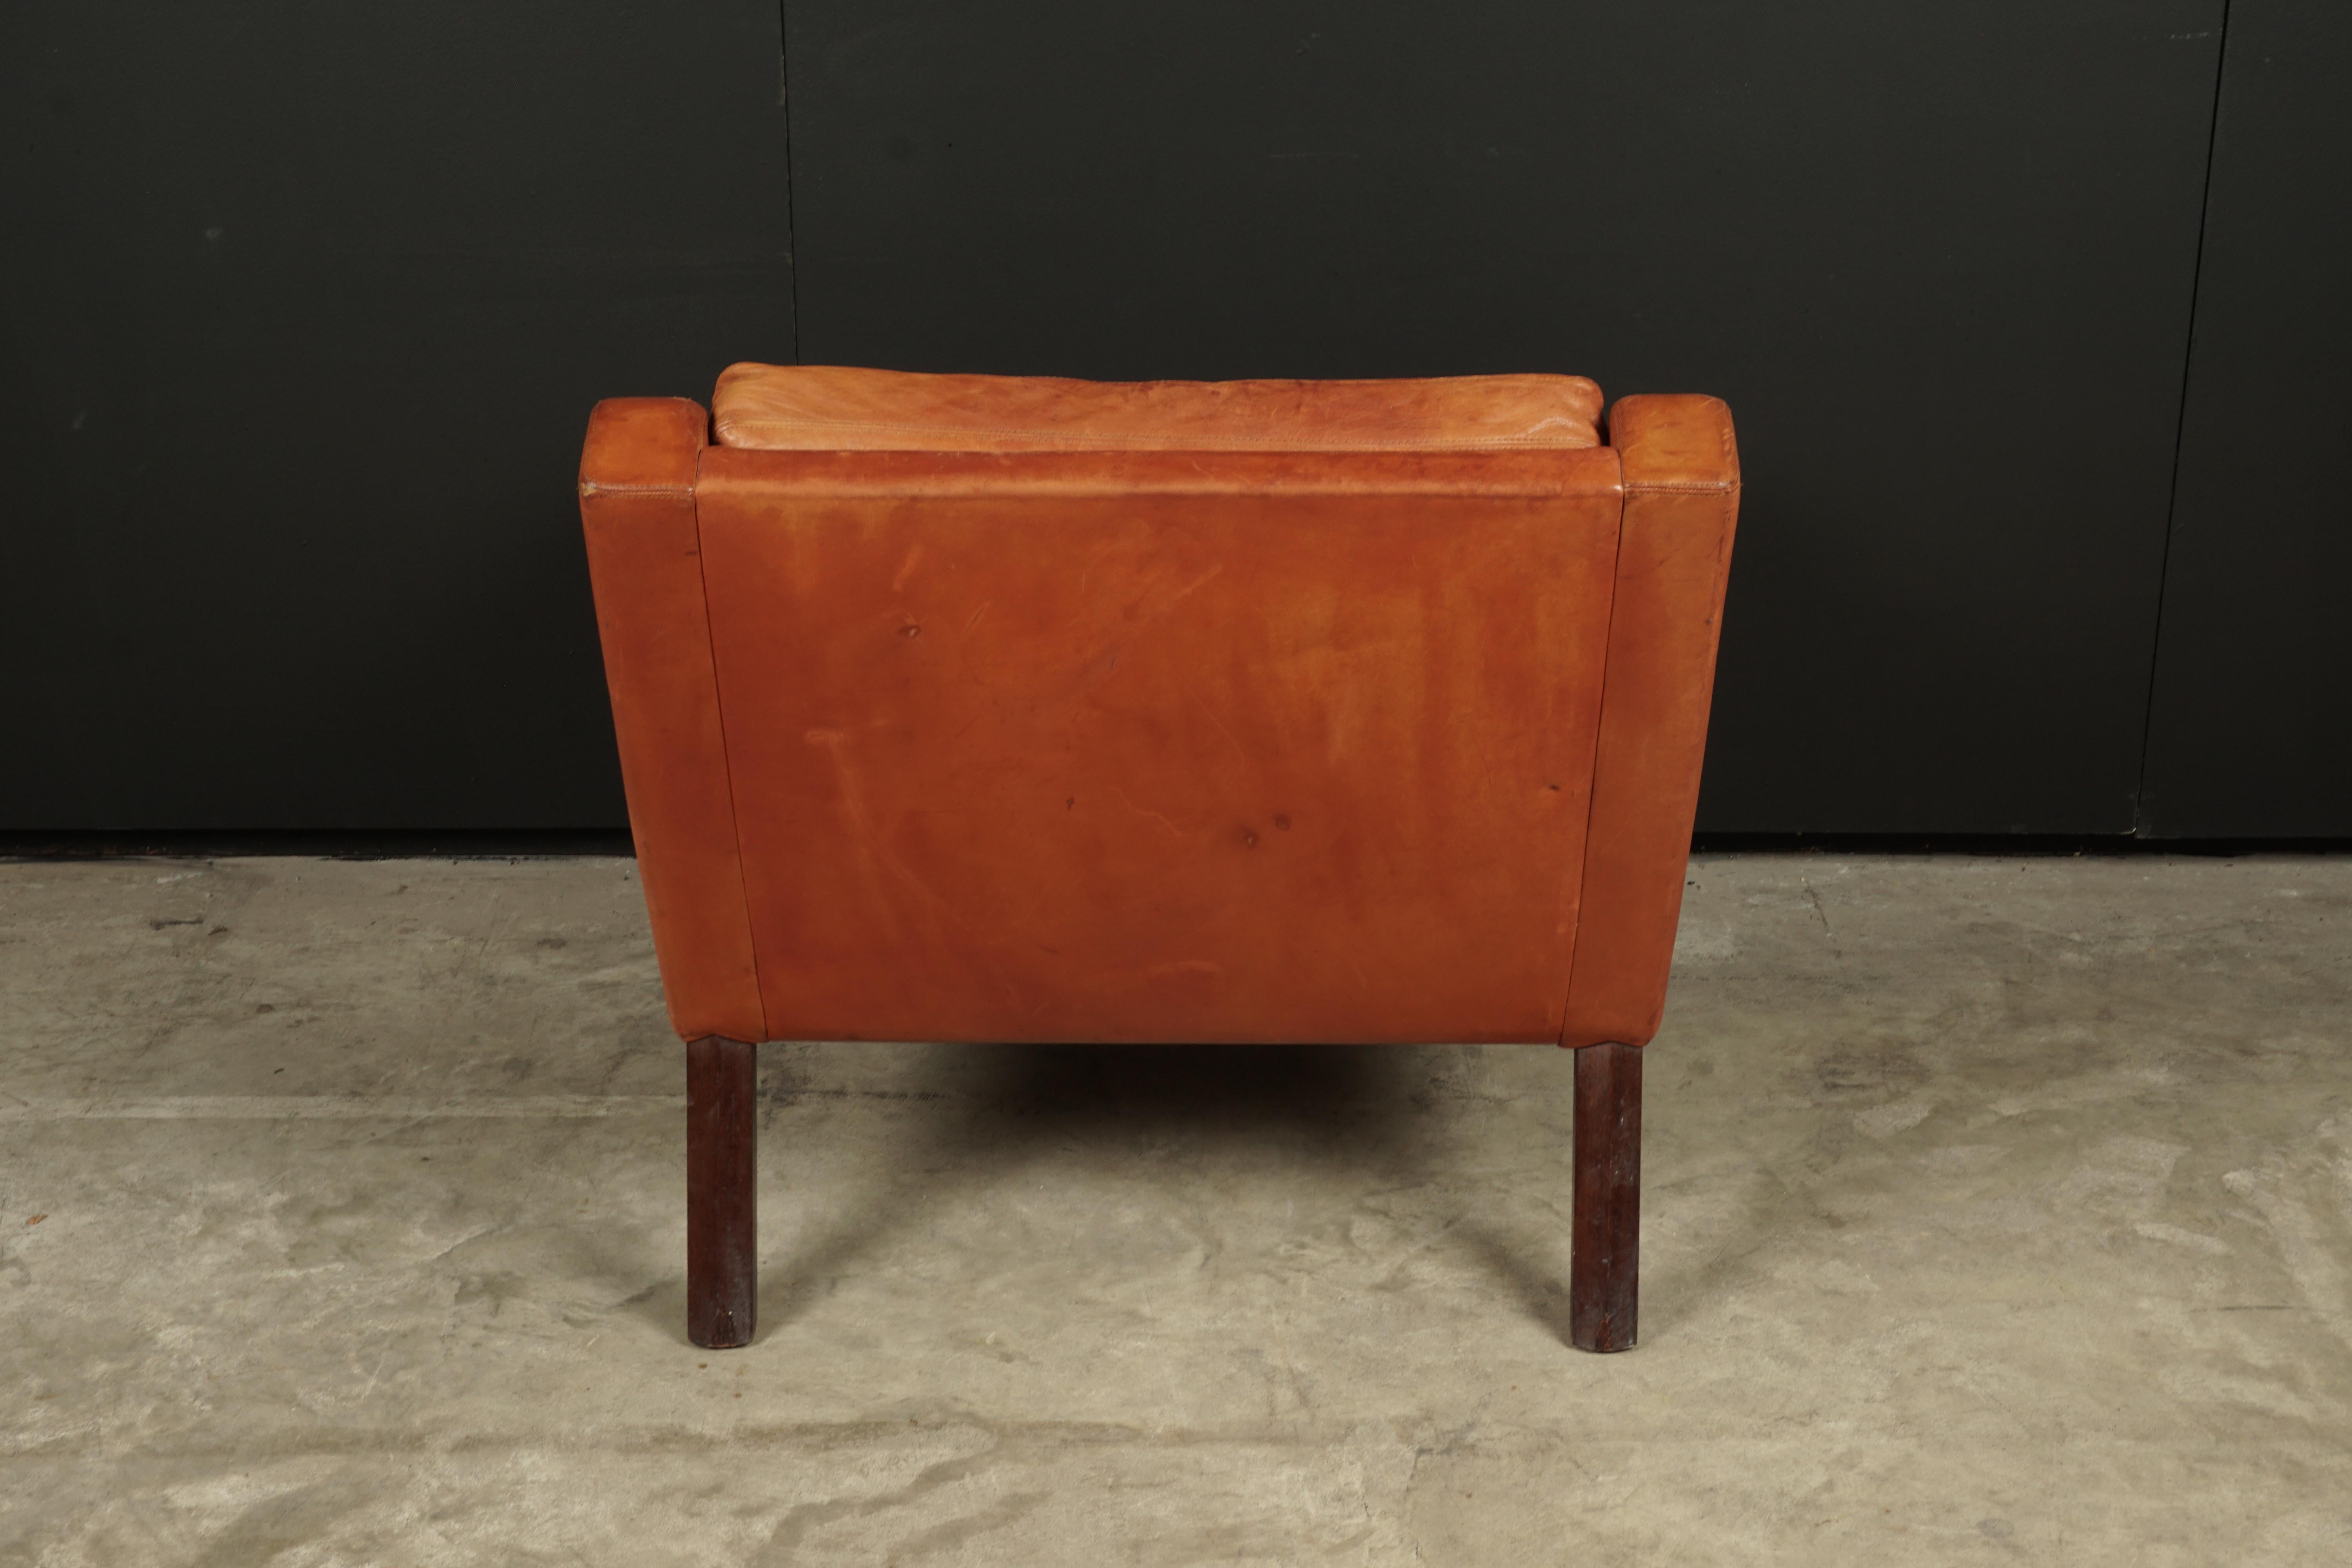 Late 20th Century Vintage Midcentury Leather Lounge Chair from Denmark, circa 1970